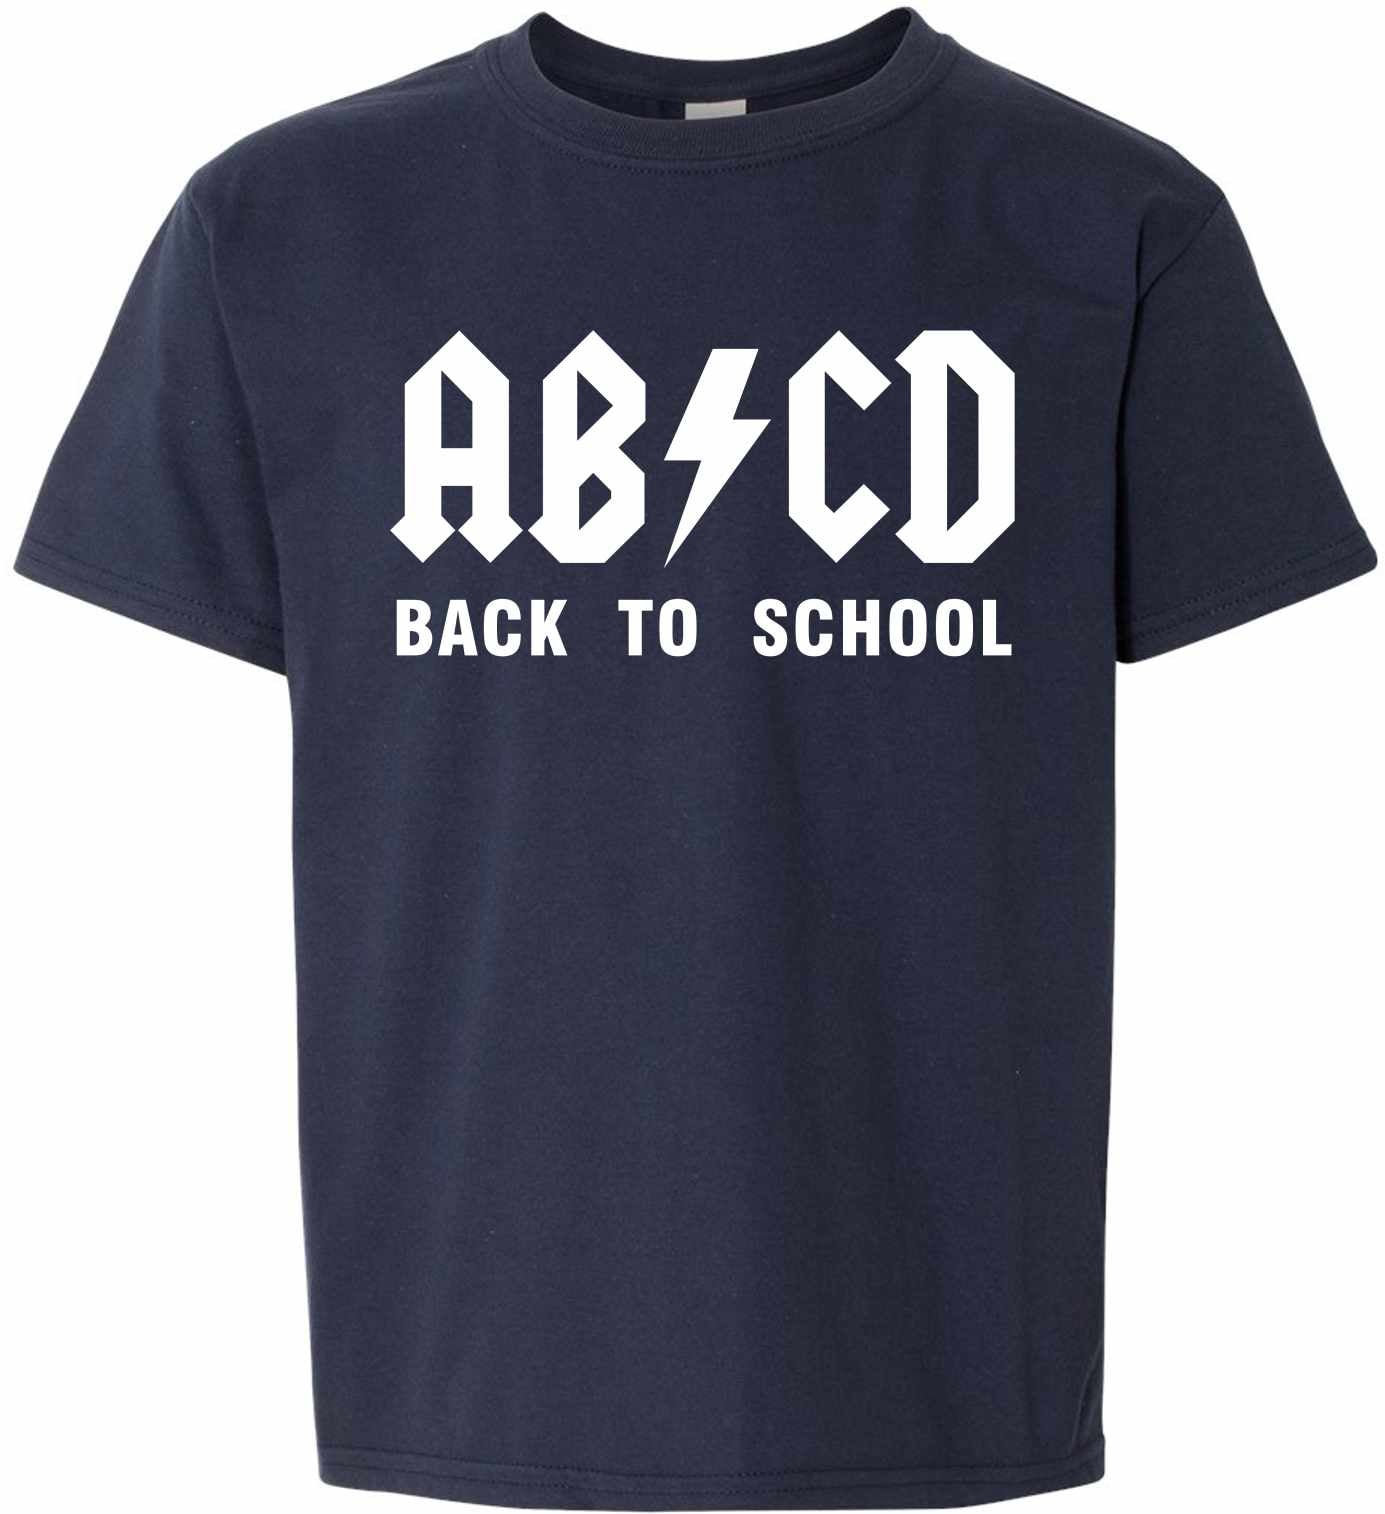 ABCD Back To School on Kids T-Shirt (#1295-201)